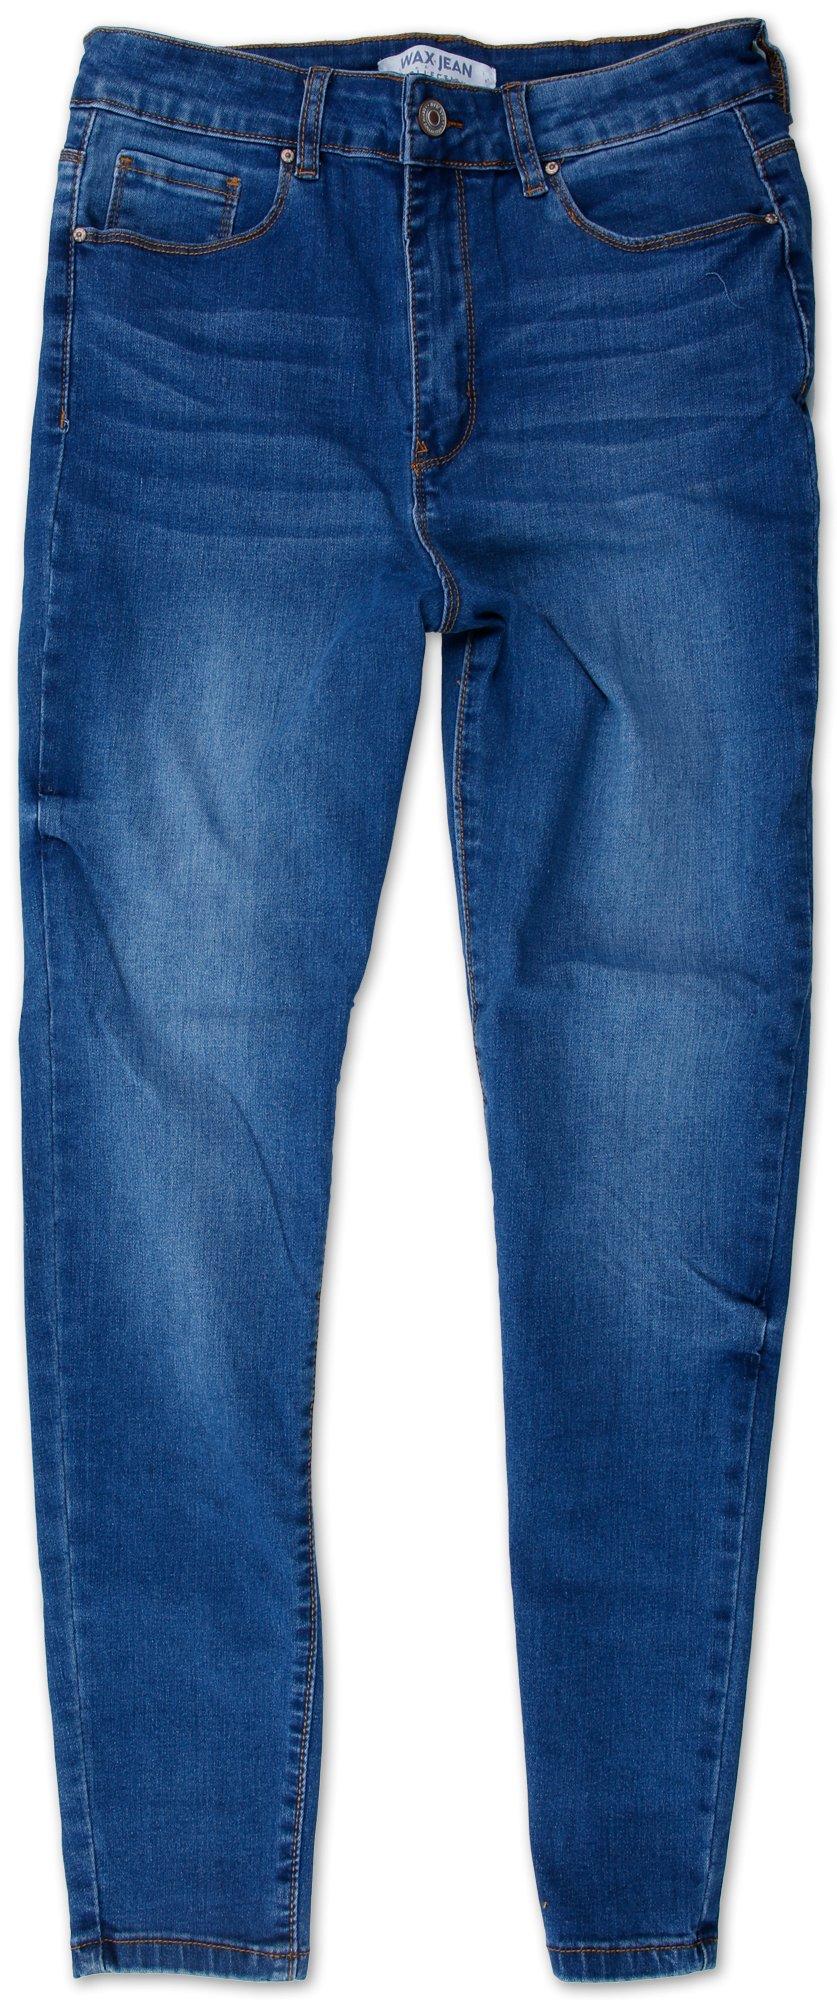 Juniors High Waisted Skinny Jeans